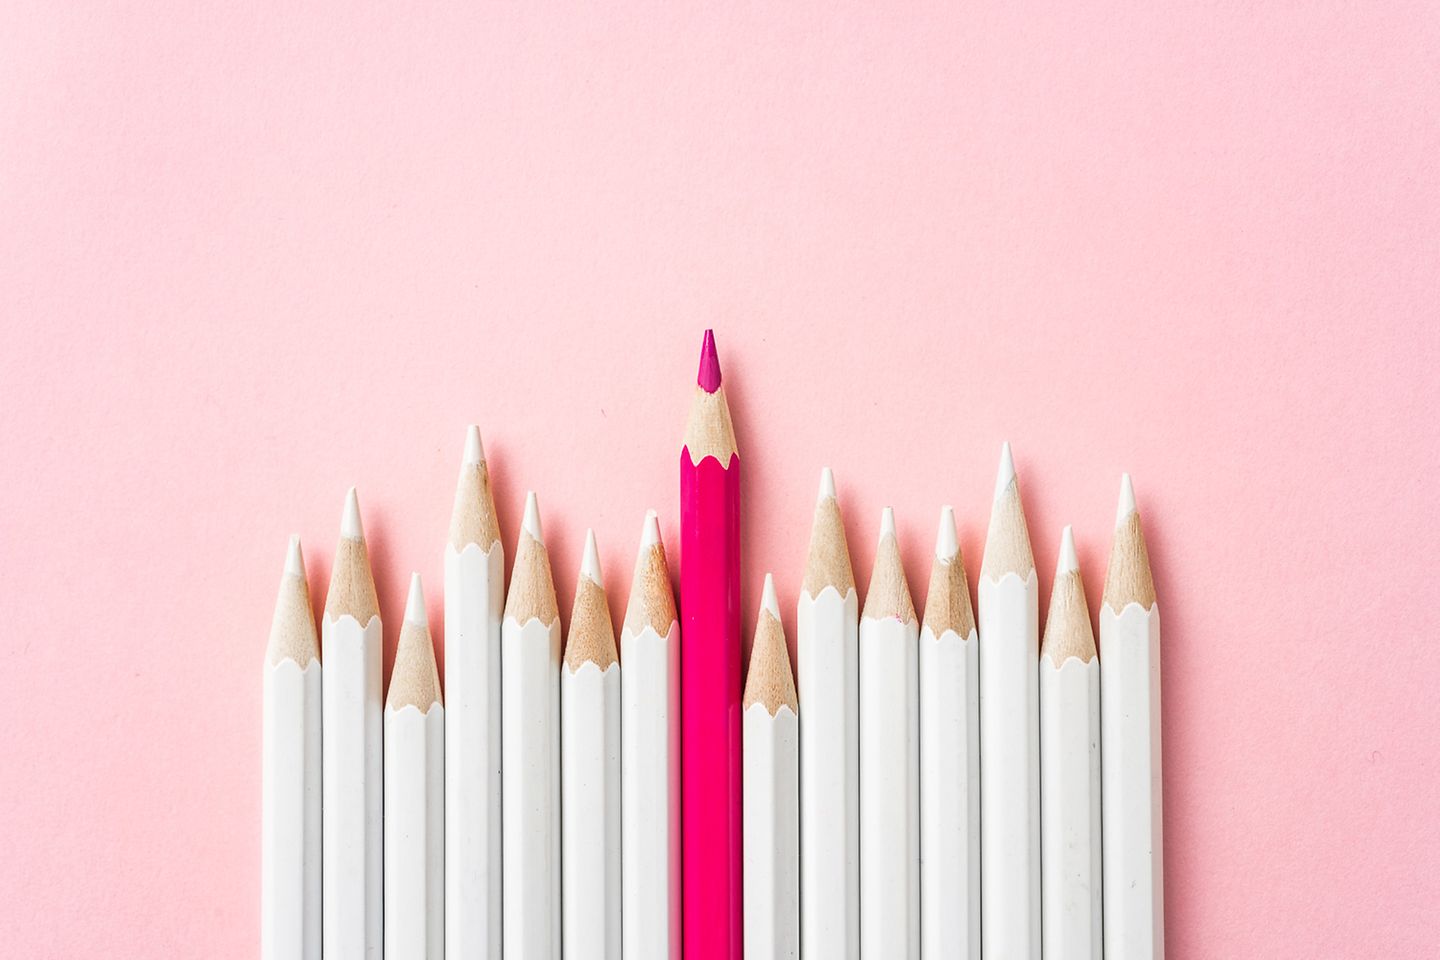 A row of white pencils with a pink pencil in the middle against a pink background